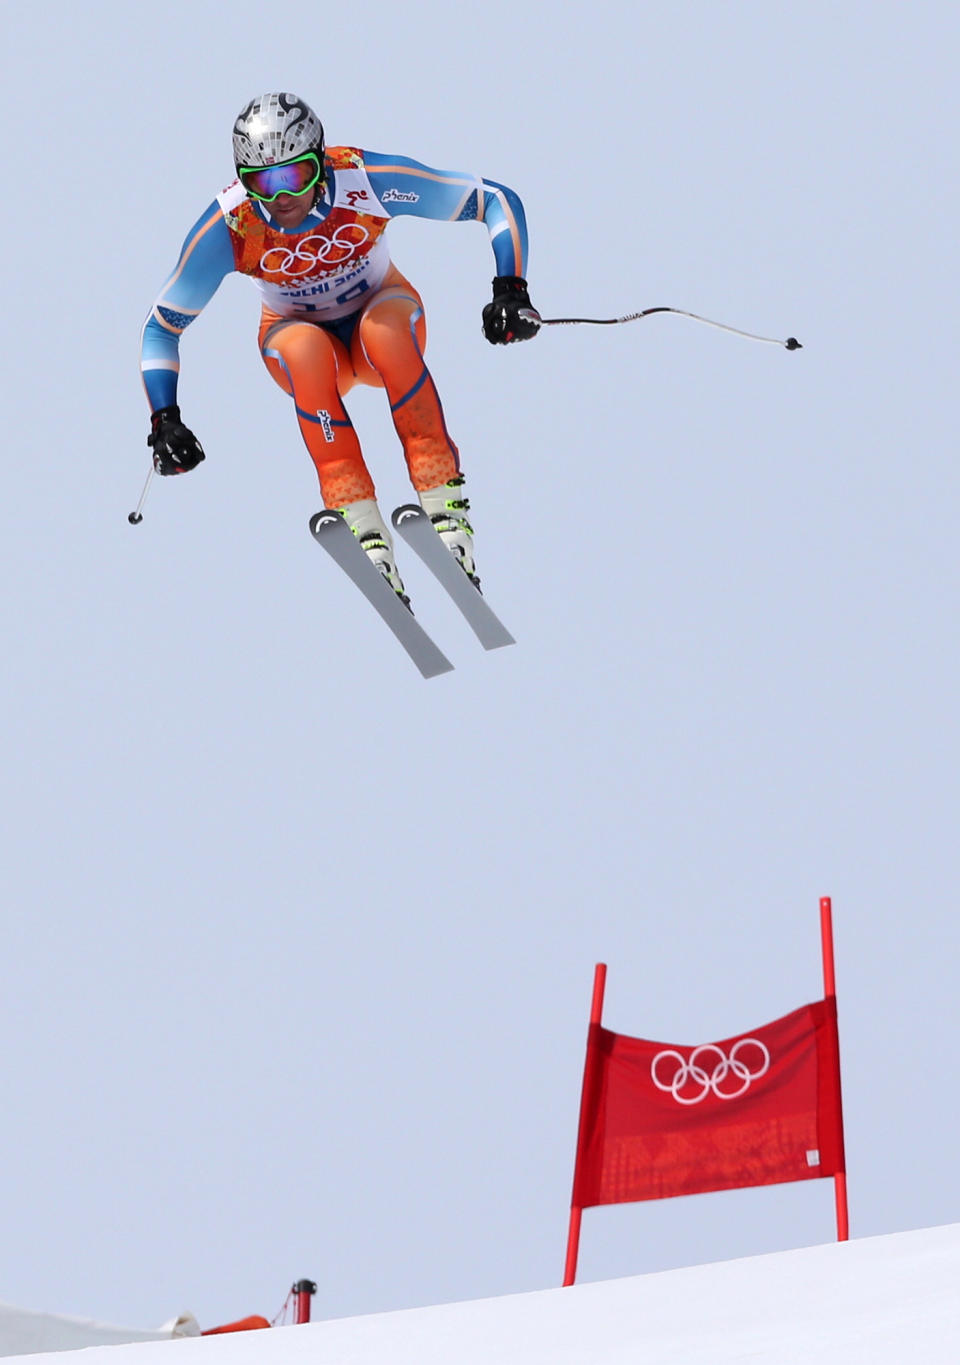 Norway's Aksel Lund Svindal jumps during the men's downhill at the Sochi 2014 Winter Olympics, Sunday, Feb. 9, 2014, in Krasnaya Polyana, Russia.(AP Photo/Luca Bruno)